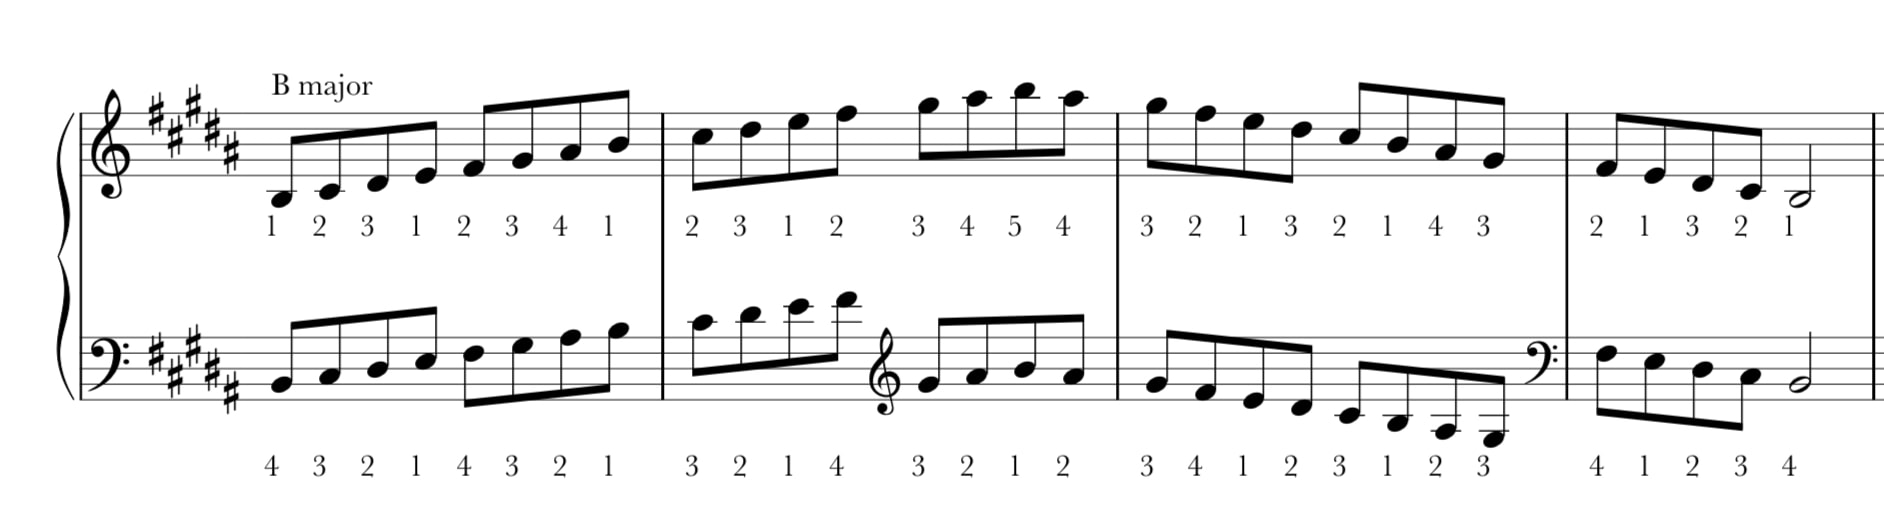 Notation for two octaves of B major scale on piano plus finger numbers